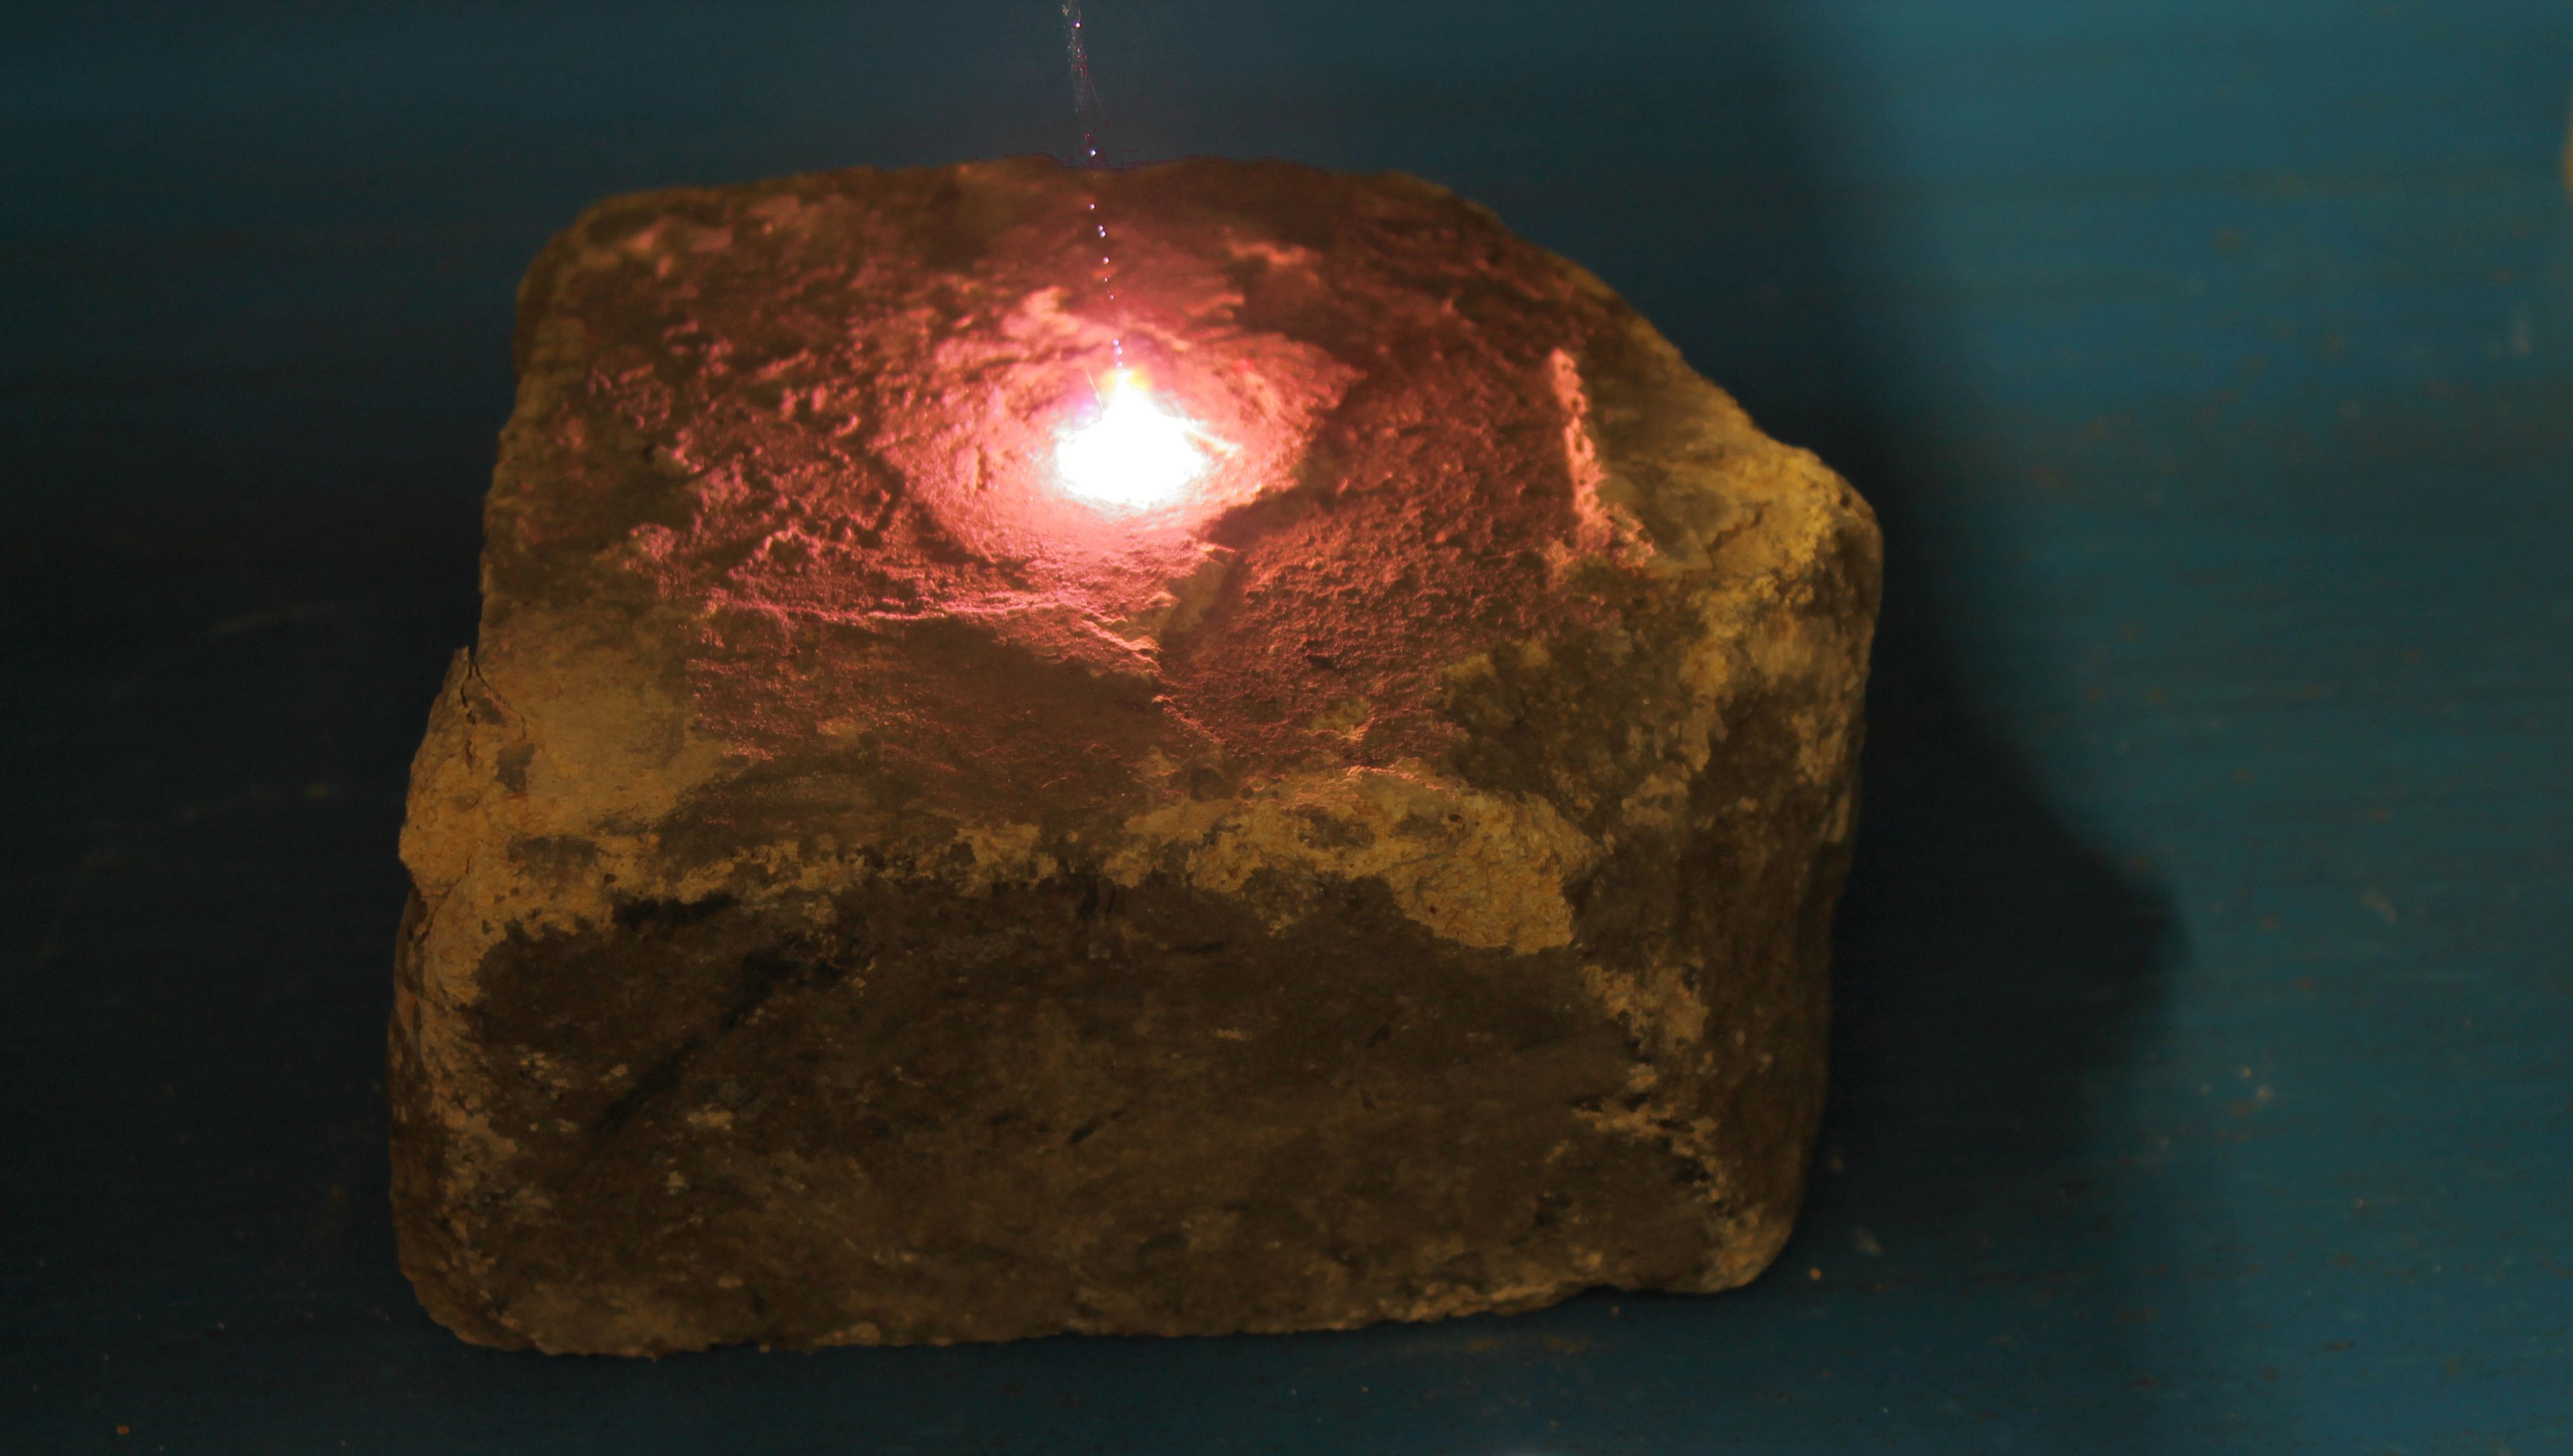 Used refractories are detected with laser measurements and reused in a CO₂-saving way.